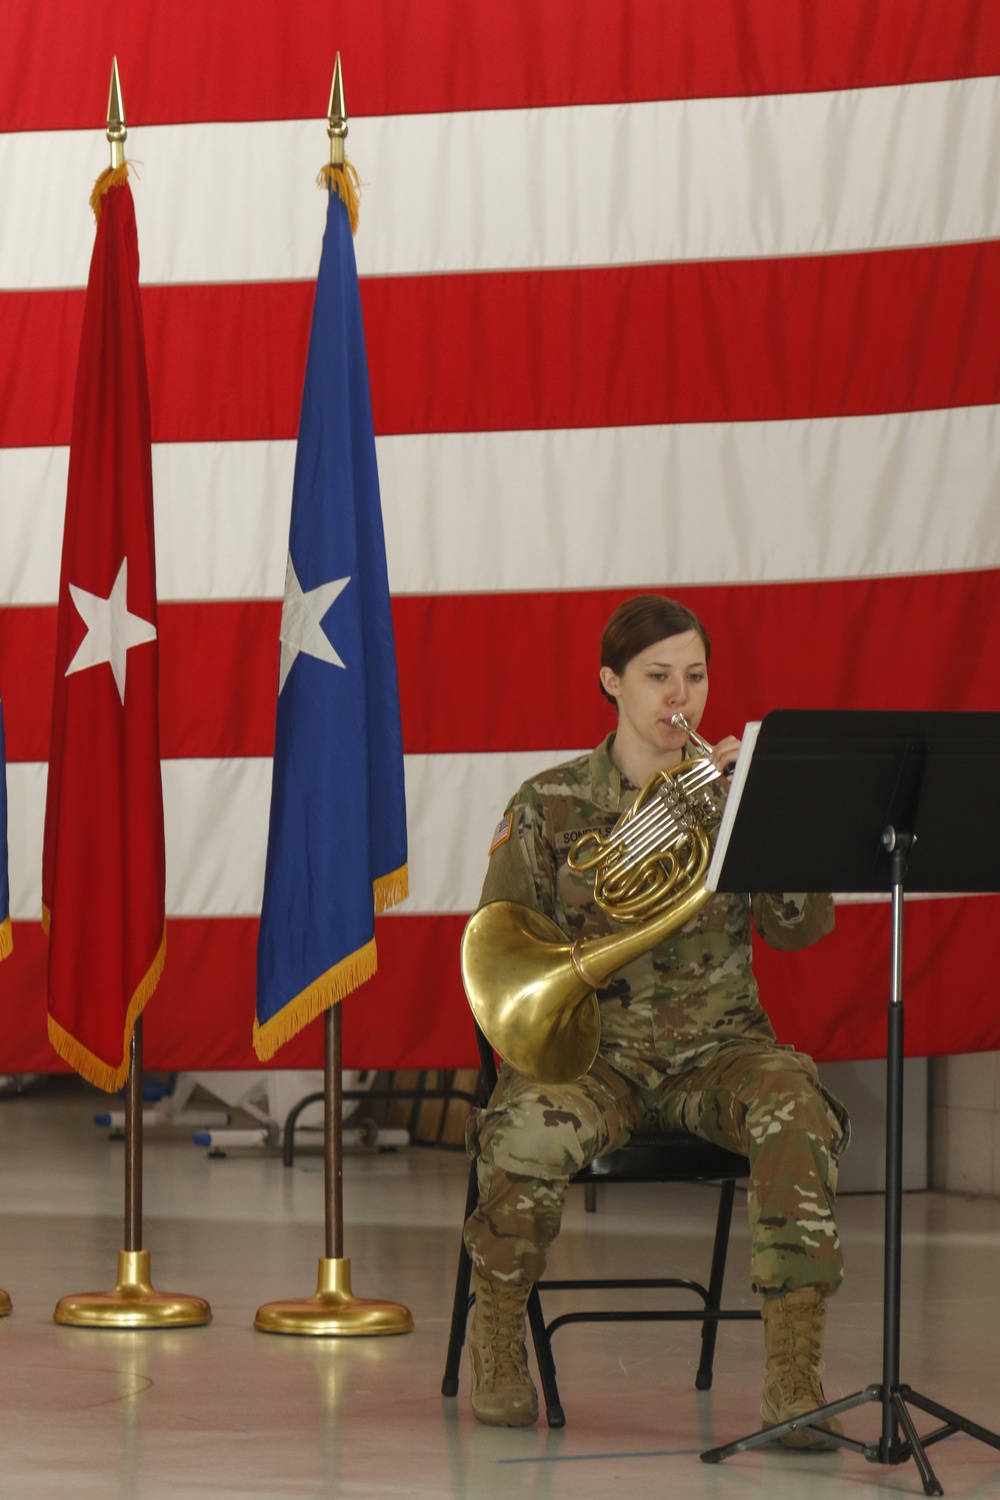 Memorial Day Service Honors Fallen Servicemembers in Madison, Wis.